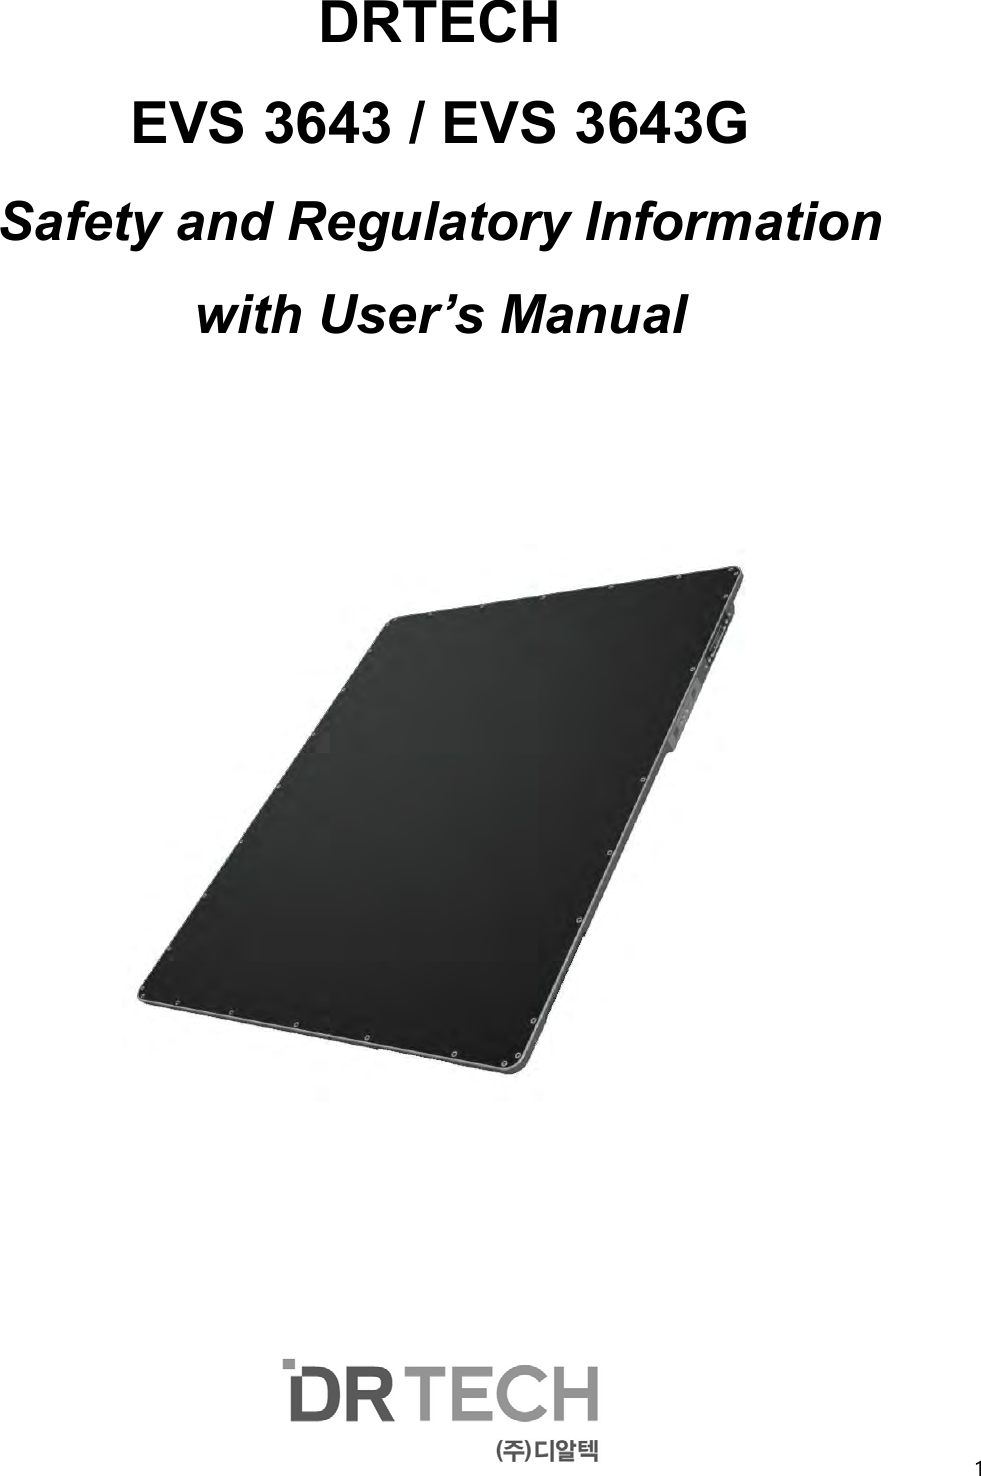  1   DRTECH   EVS 3643 / EVS 3643G Safety and Regulatory Information with User’s Manual                           